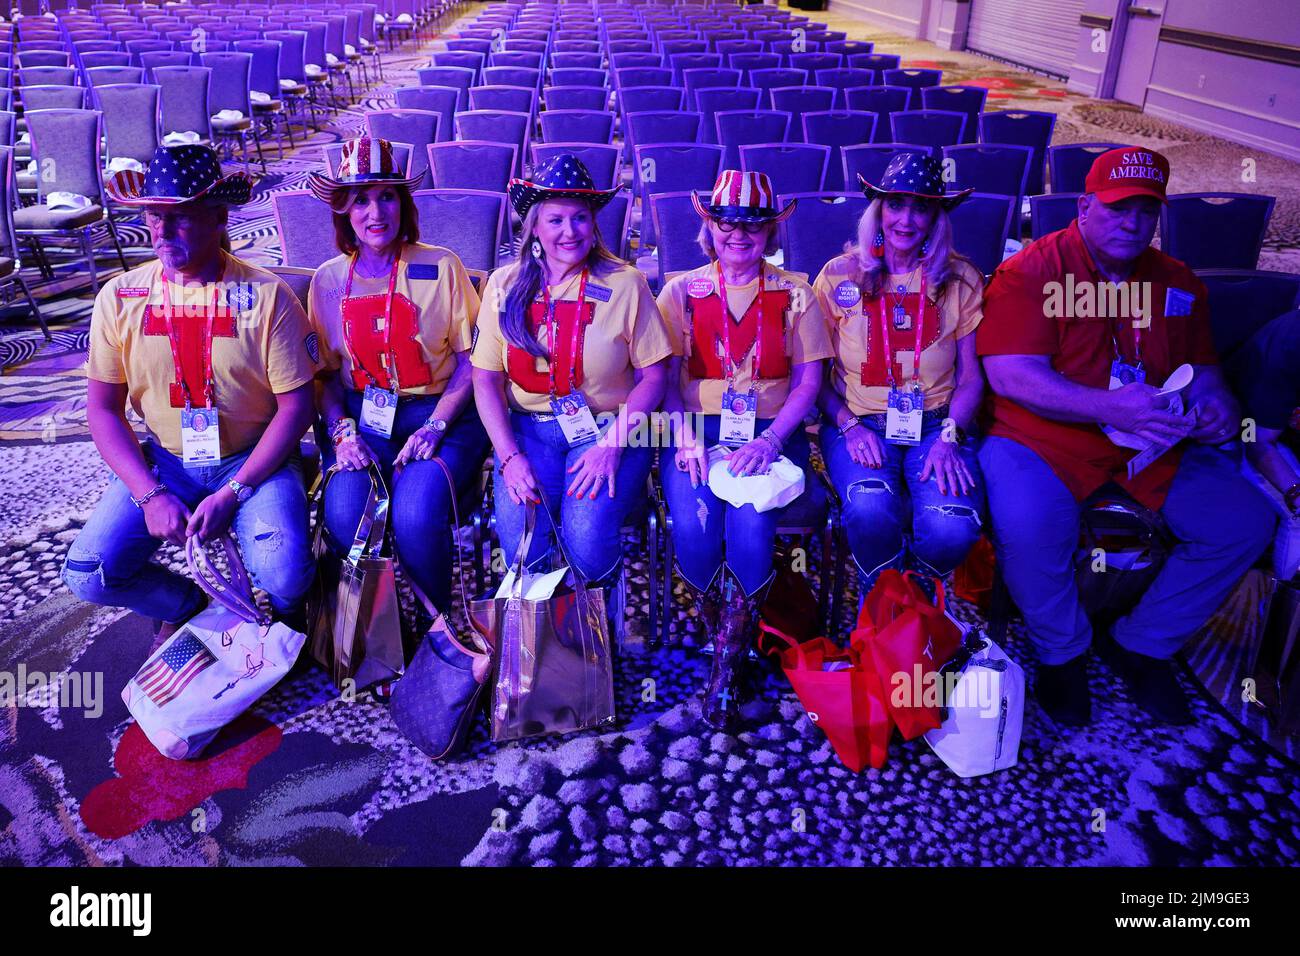 Members of the 'Trump Tribe of Texas' take their seats while wearing t-shirts spelling out 'TRUMP' for former U.S. President Donald Trump at the Conservative Political Action Conference (CPAC) in Dallas, Texas, U.S., August 4, 2022.  REUTERS/Brian Snyder Stock Photo